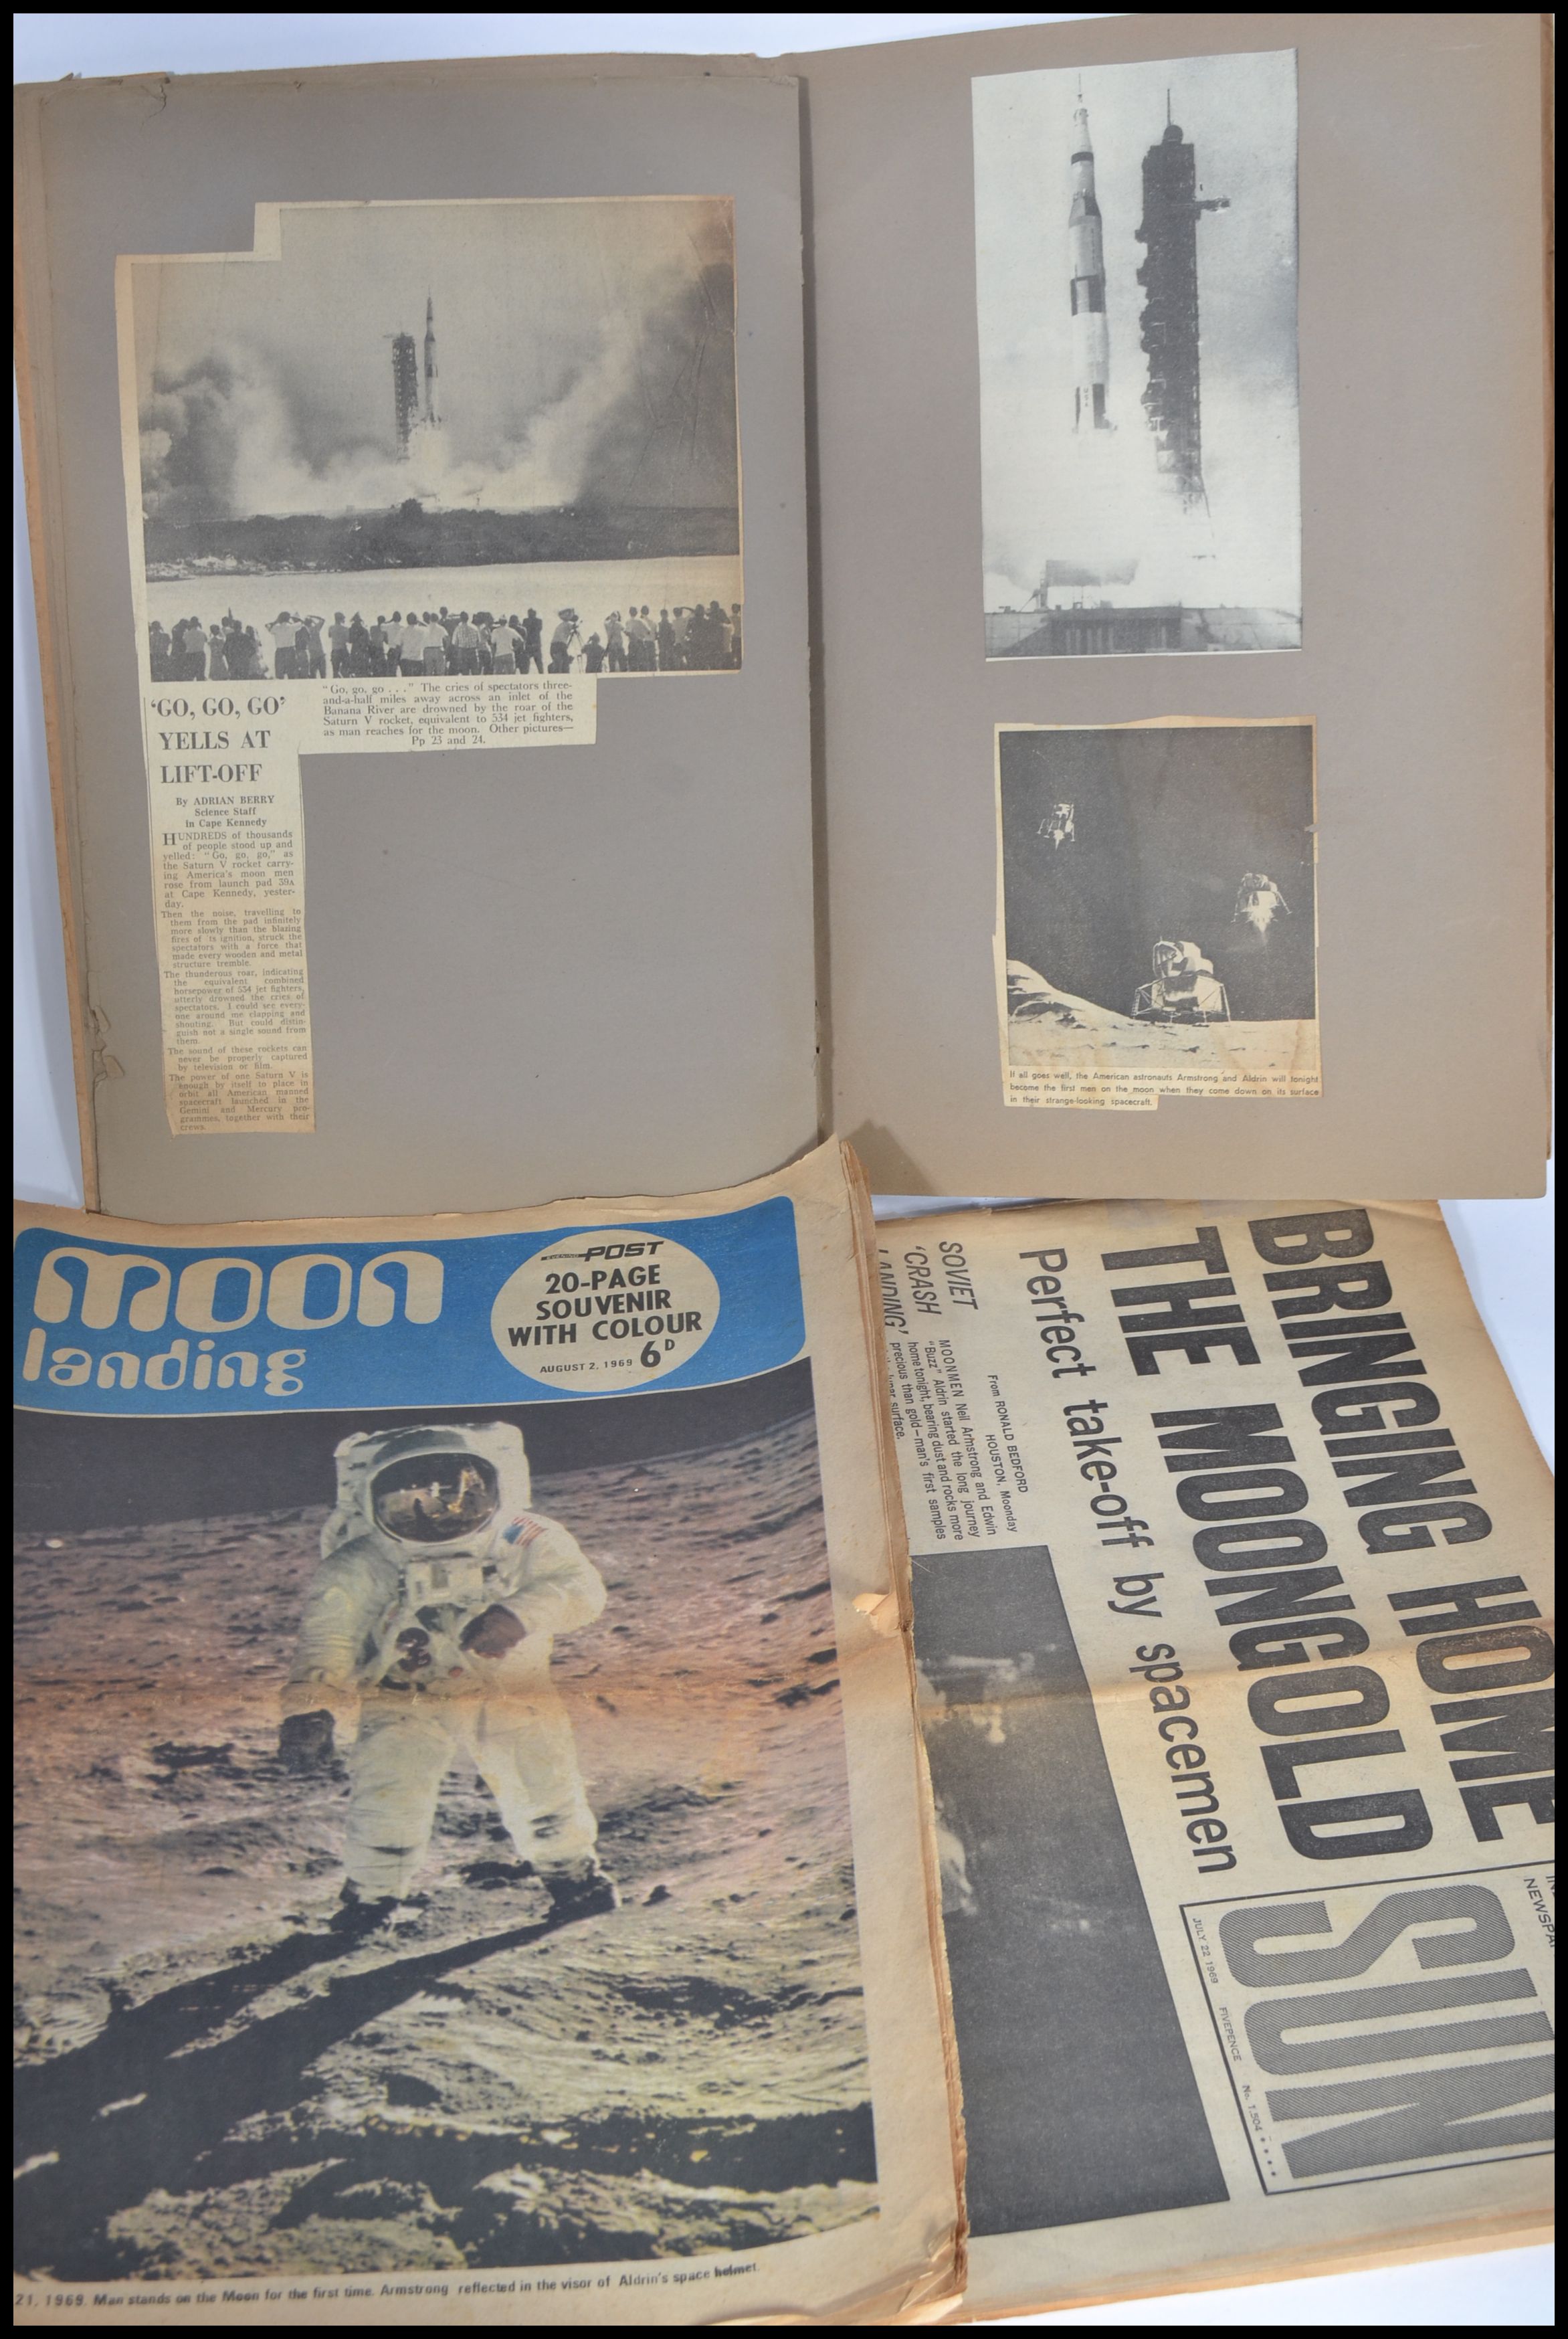 A collection of ephemera pertaining to The Moon Landing to include newspaper , scrapbook etc. Please